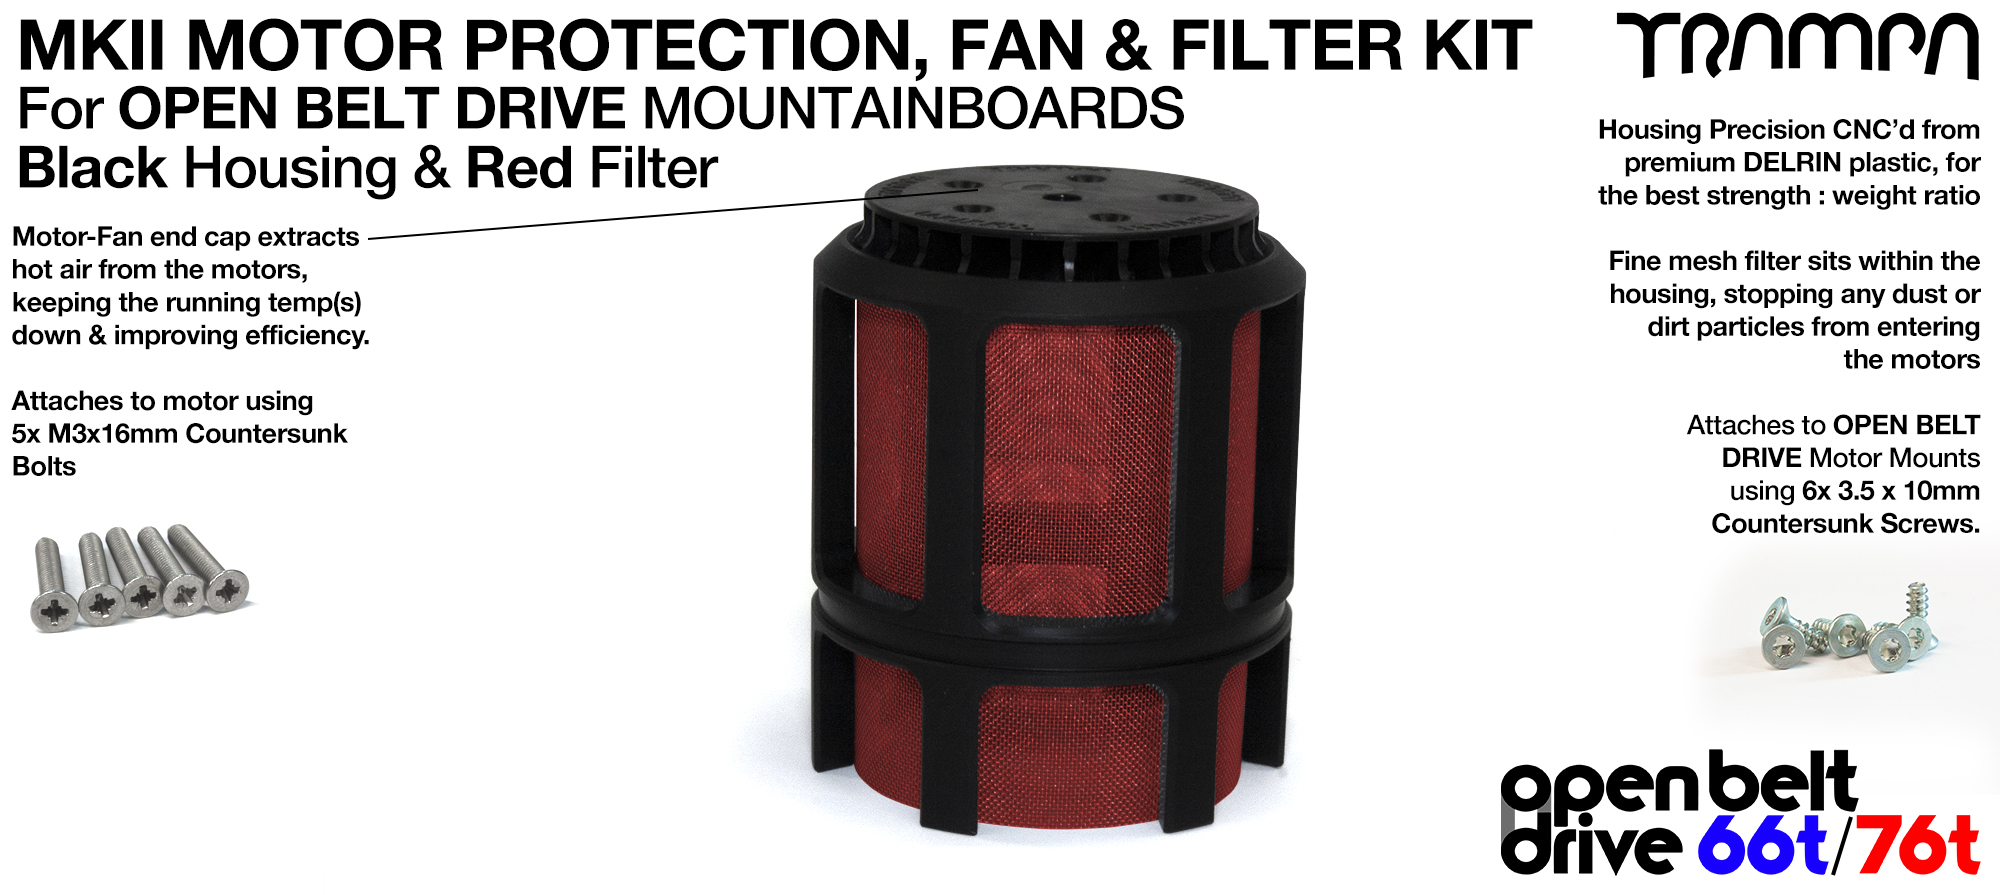 FULL CAGE Motor protection SUPER STRONG DELRIN Plastic includes Fan & RED Filter - SINGLE